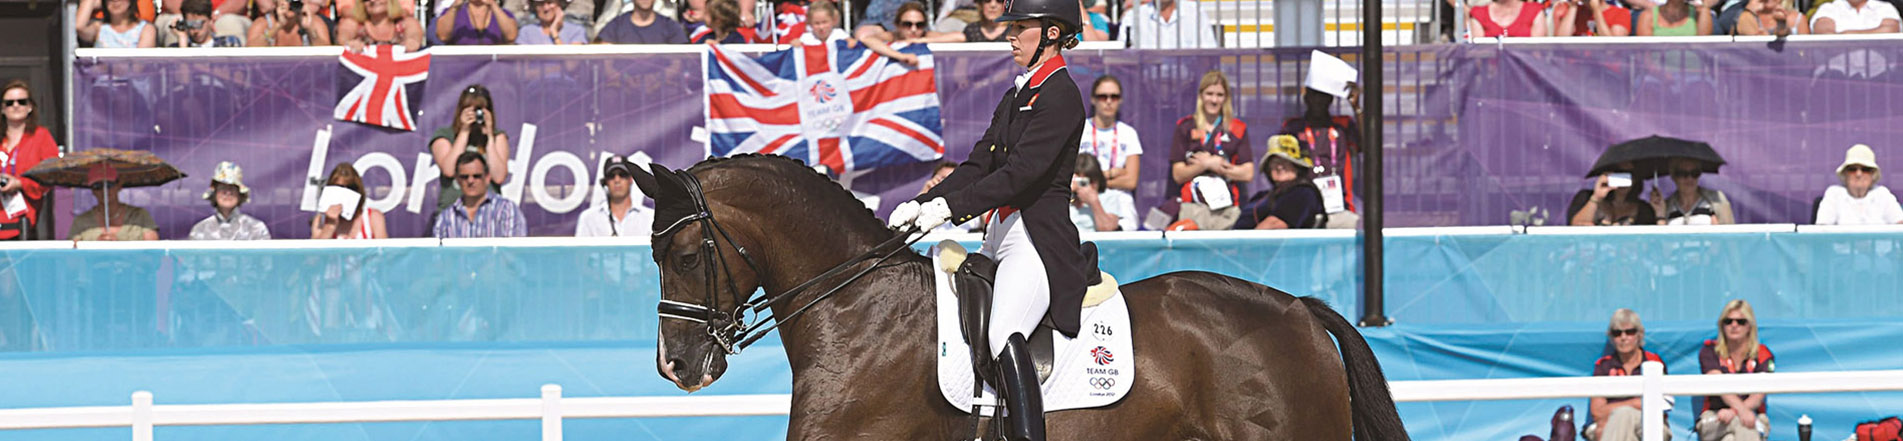 Olympic Games 2016 Dressage